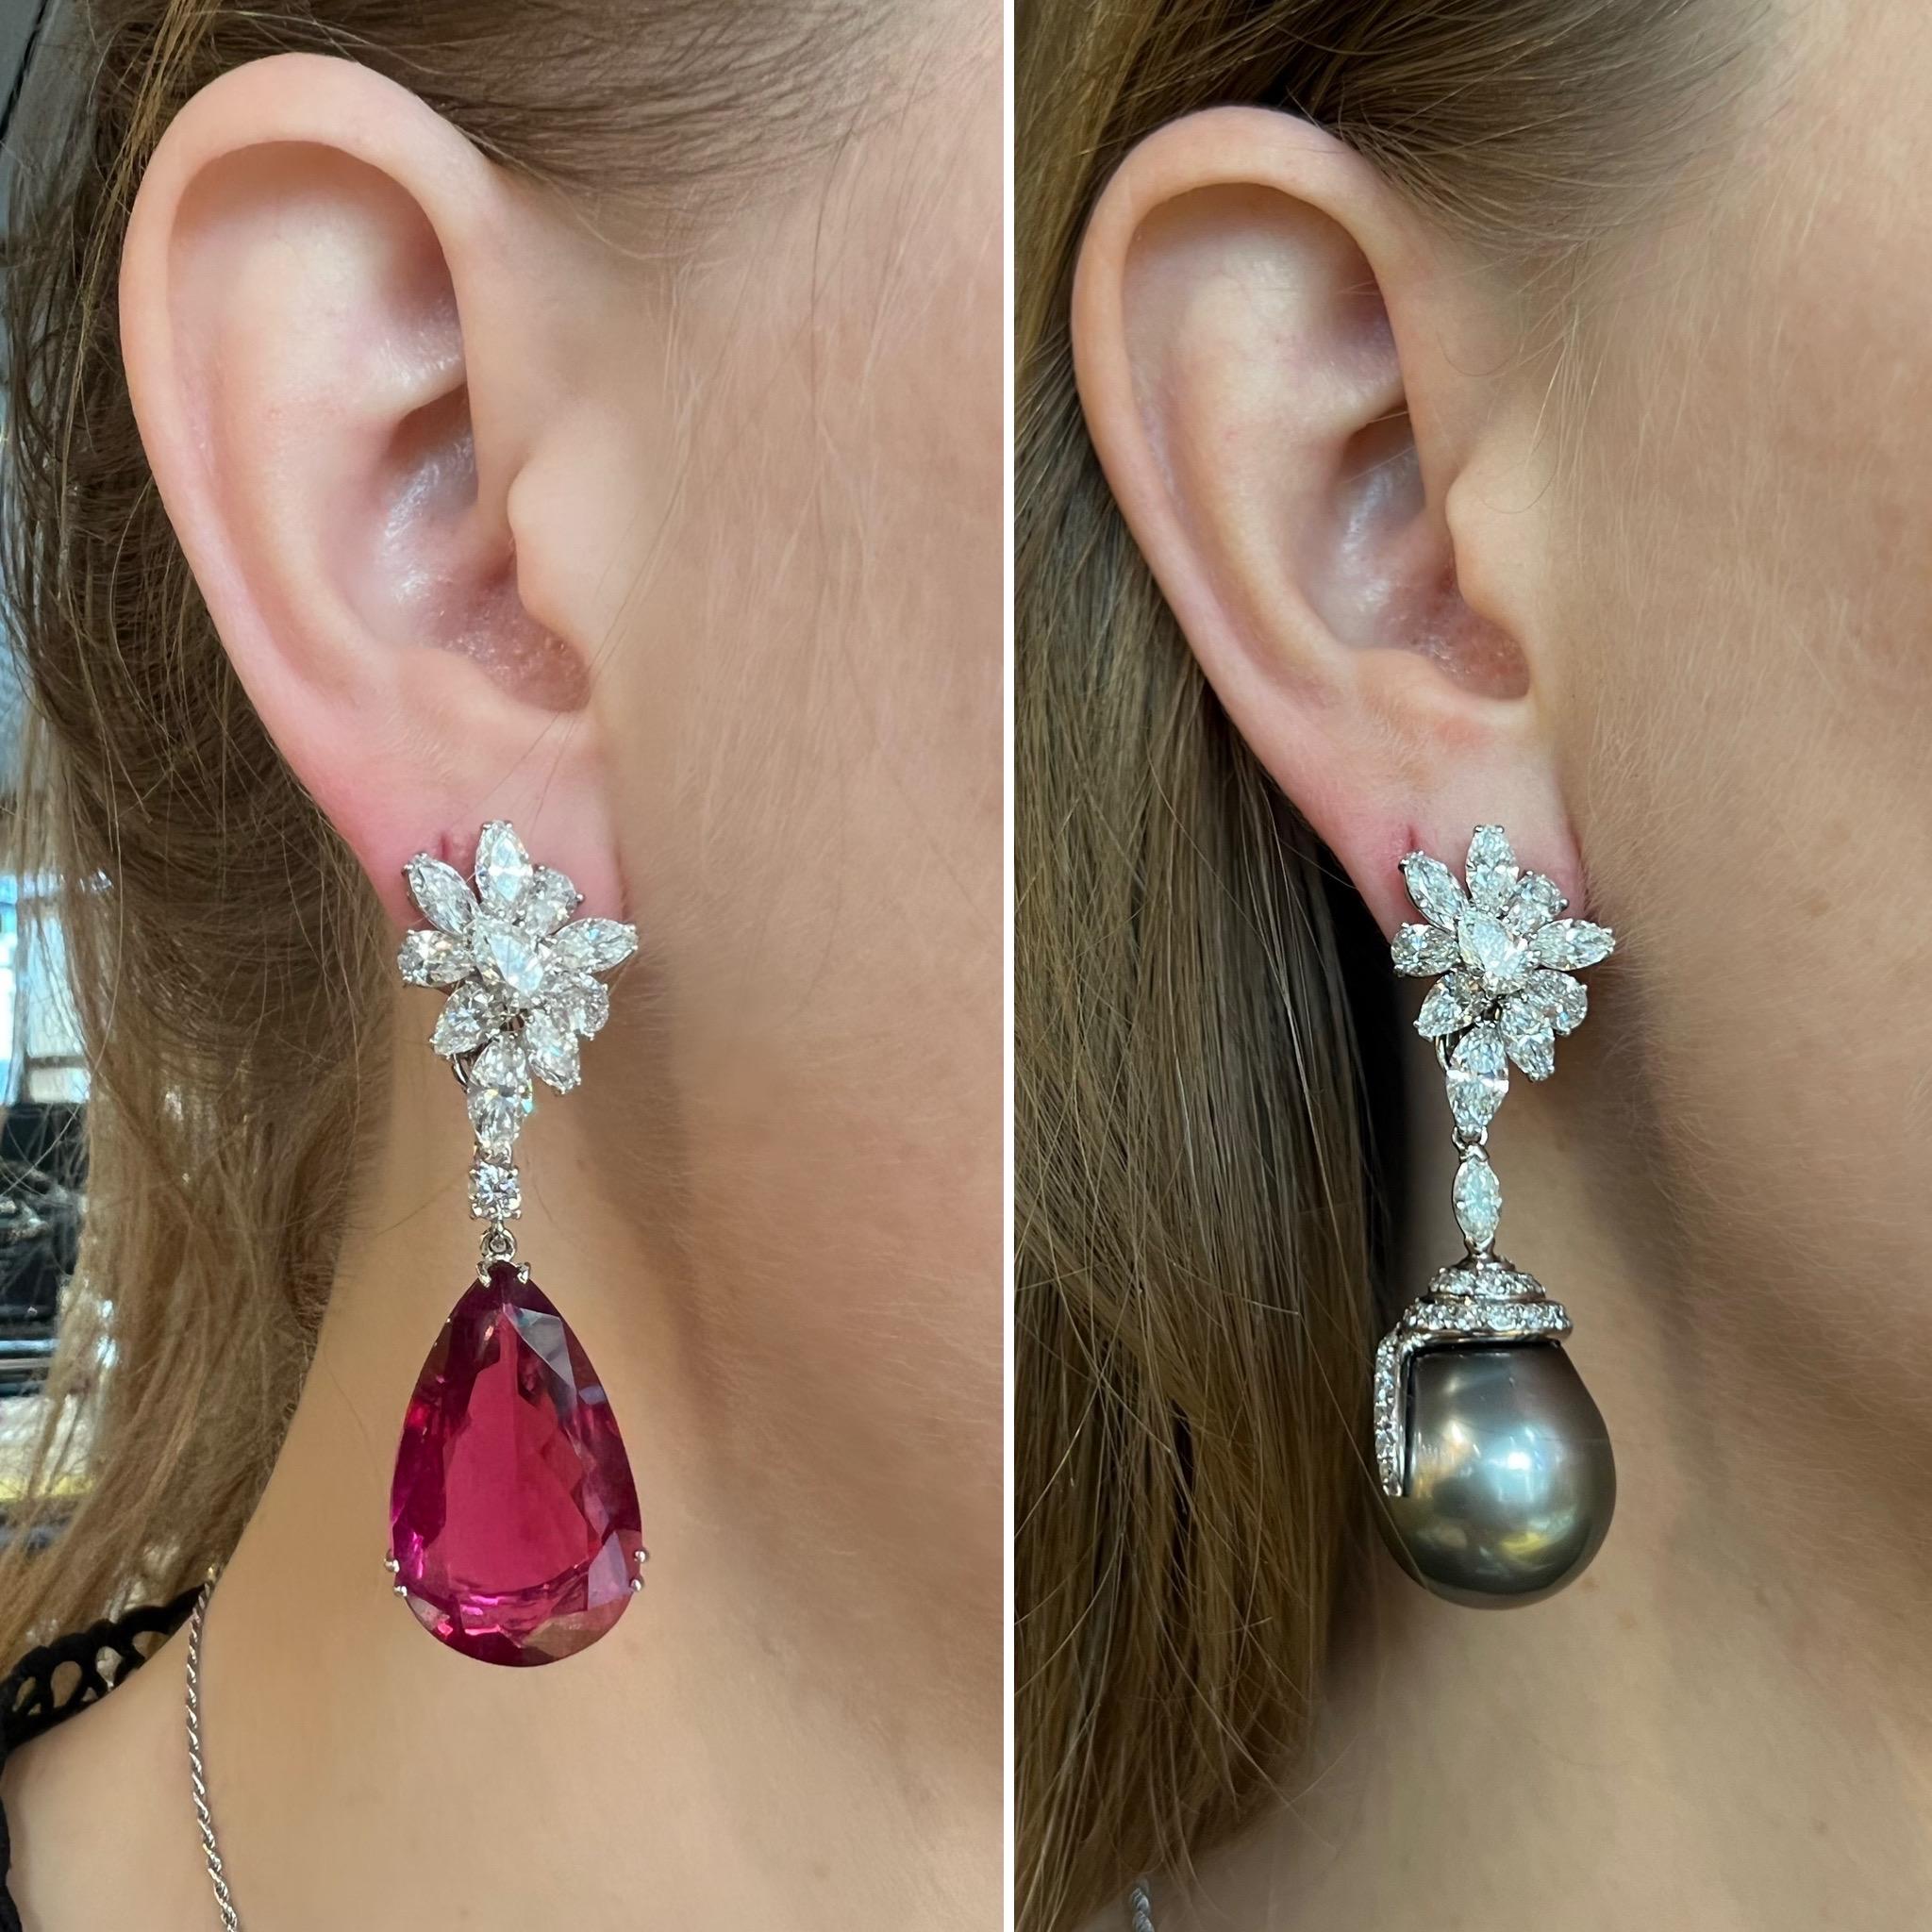 This beautiful pair of earrings can be wear in 7 possible combinations.
The upper part in white gold set with pear and marquise cut diamonds (approx. 6 carats) can stand alone.

The upper part has a system that will allow you to add at your